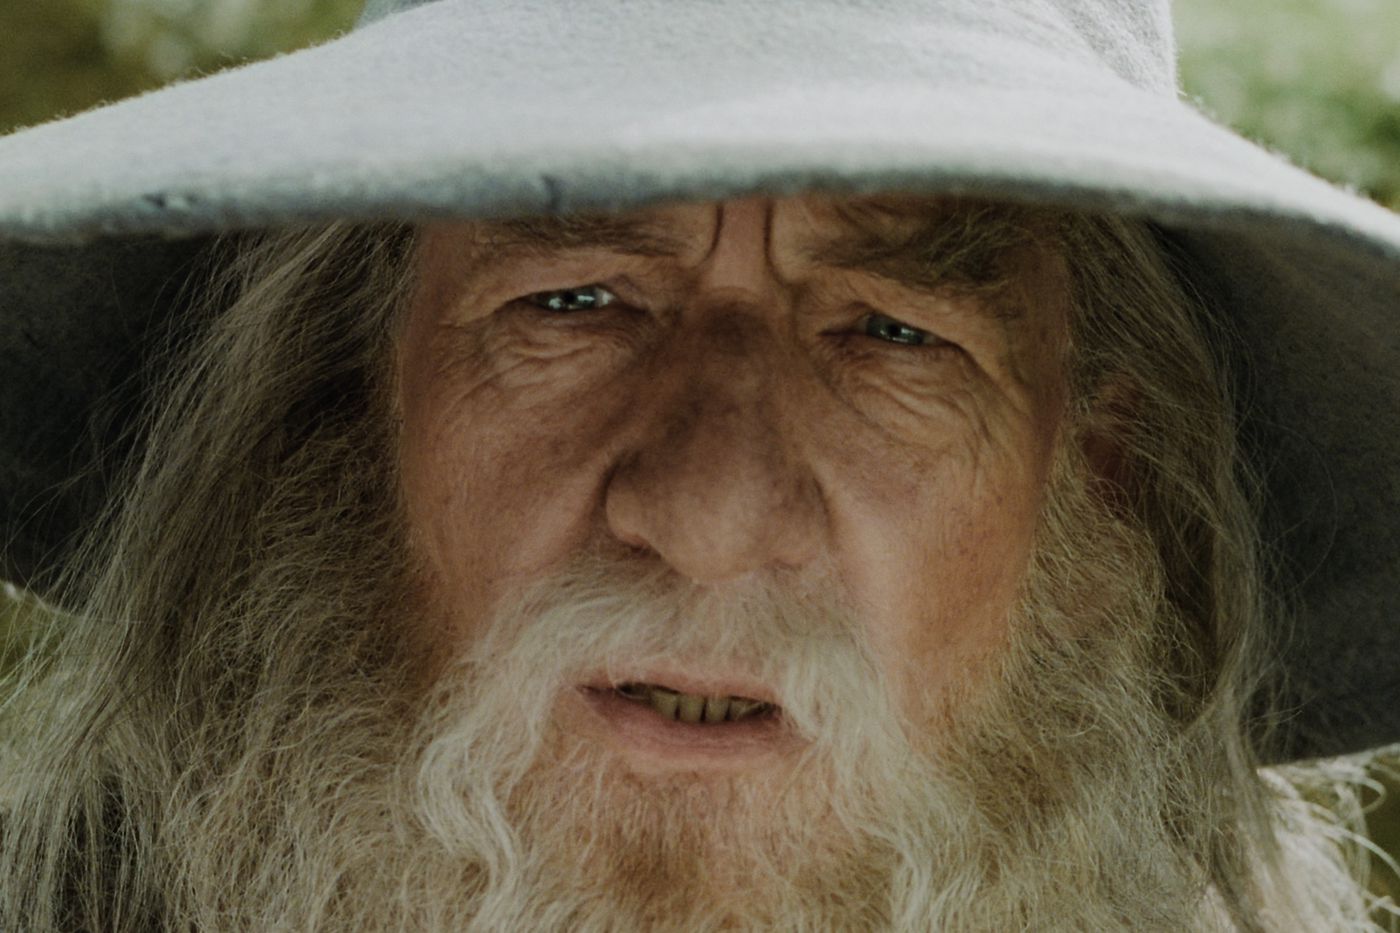 Gandalf Amazon's Lord of the Rings: The Rings of Power? - Polygon